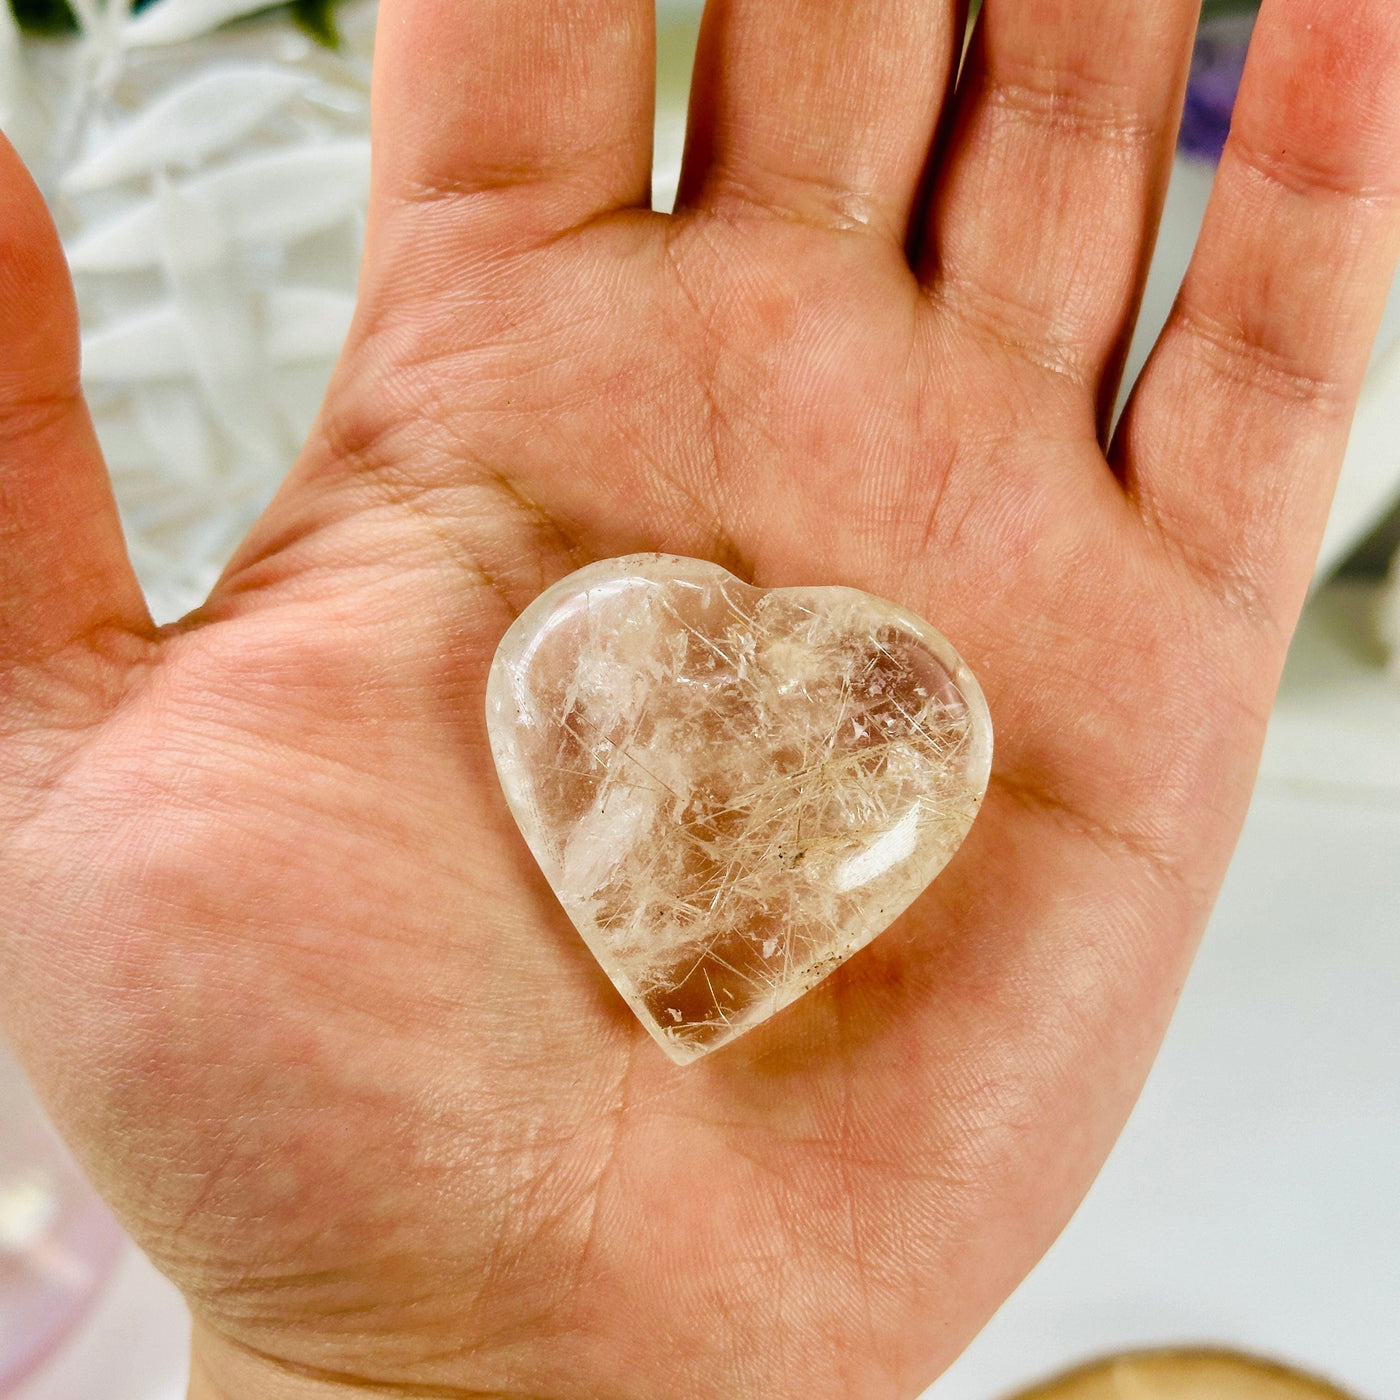 Rutilated Quartz Heart - Crystal Heart - OOAK in hand for size reference